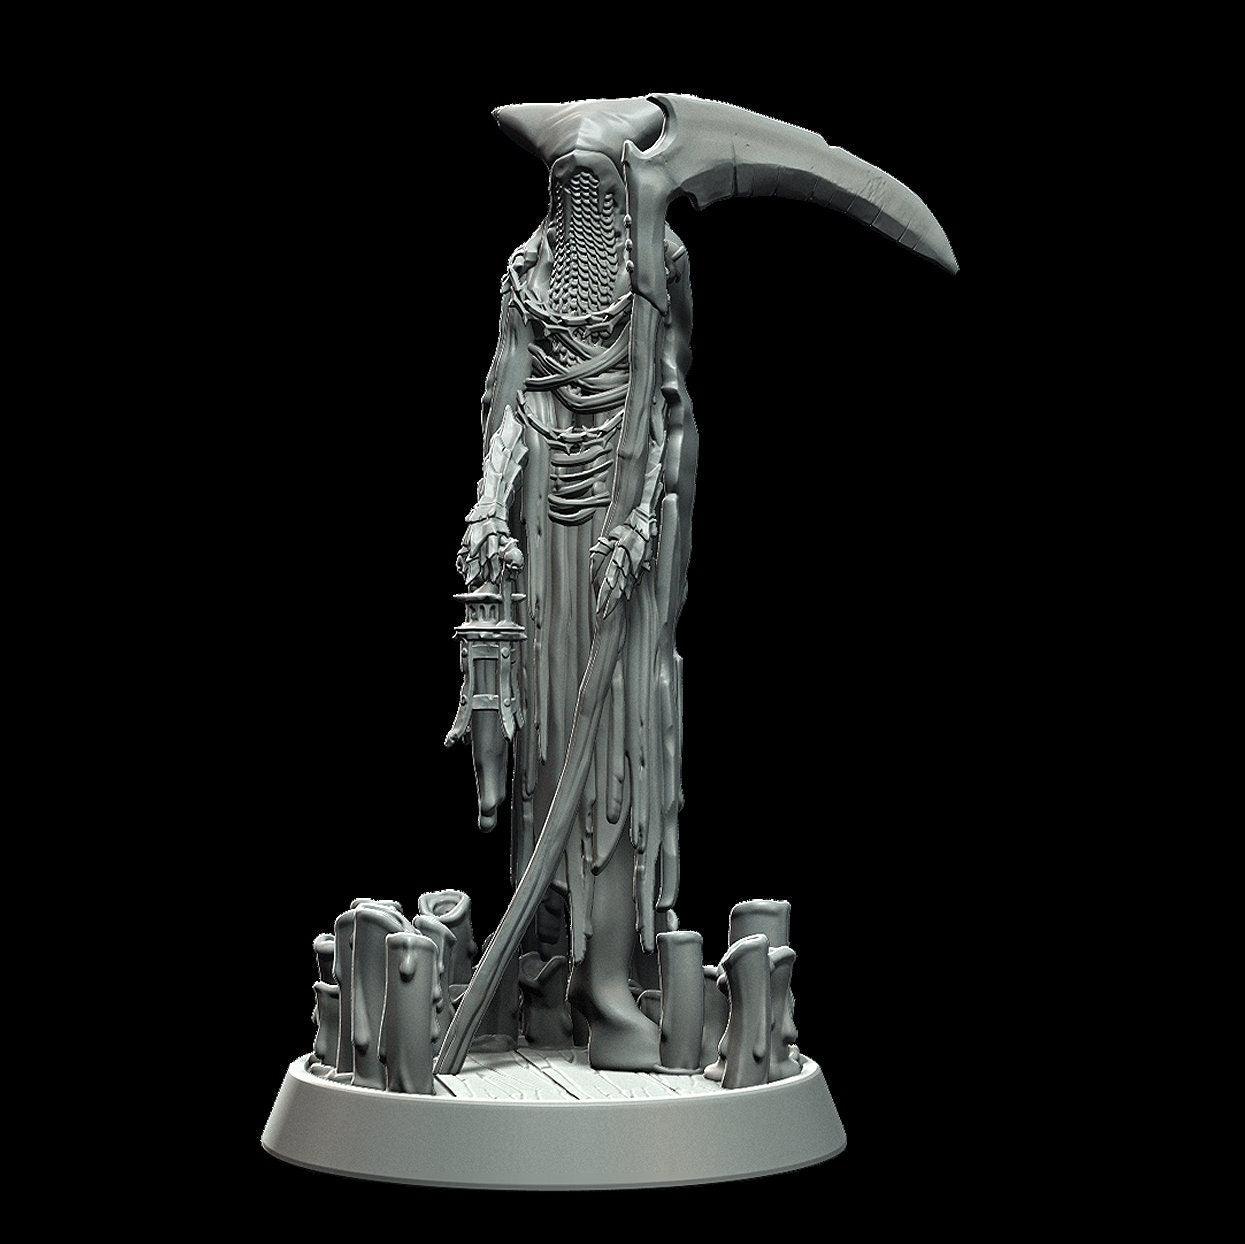 Cursed Wretch Miniature - 3 Poses - 28mm scale Tabletop gaming DnD Miniature Dungeons and Dragons dnd 5e - Plague Miniatures shop for DnD Miniatures